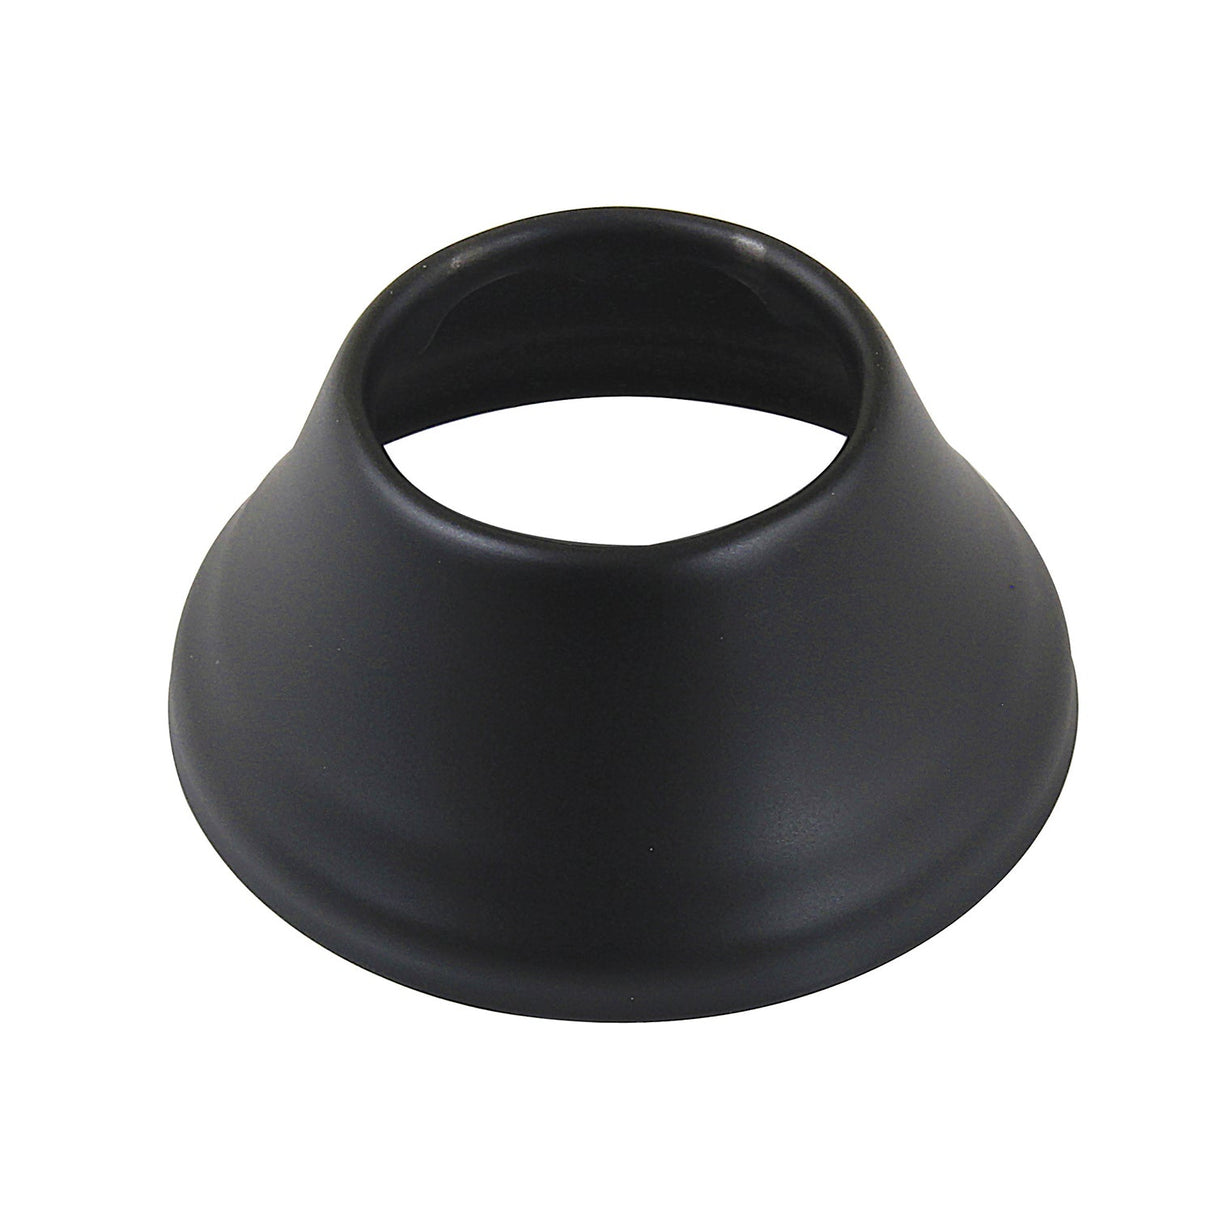 Made To Match FLBELL11230 1-1/2 Inch ID x 3 Inch OD Bell Flange, Matte Black